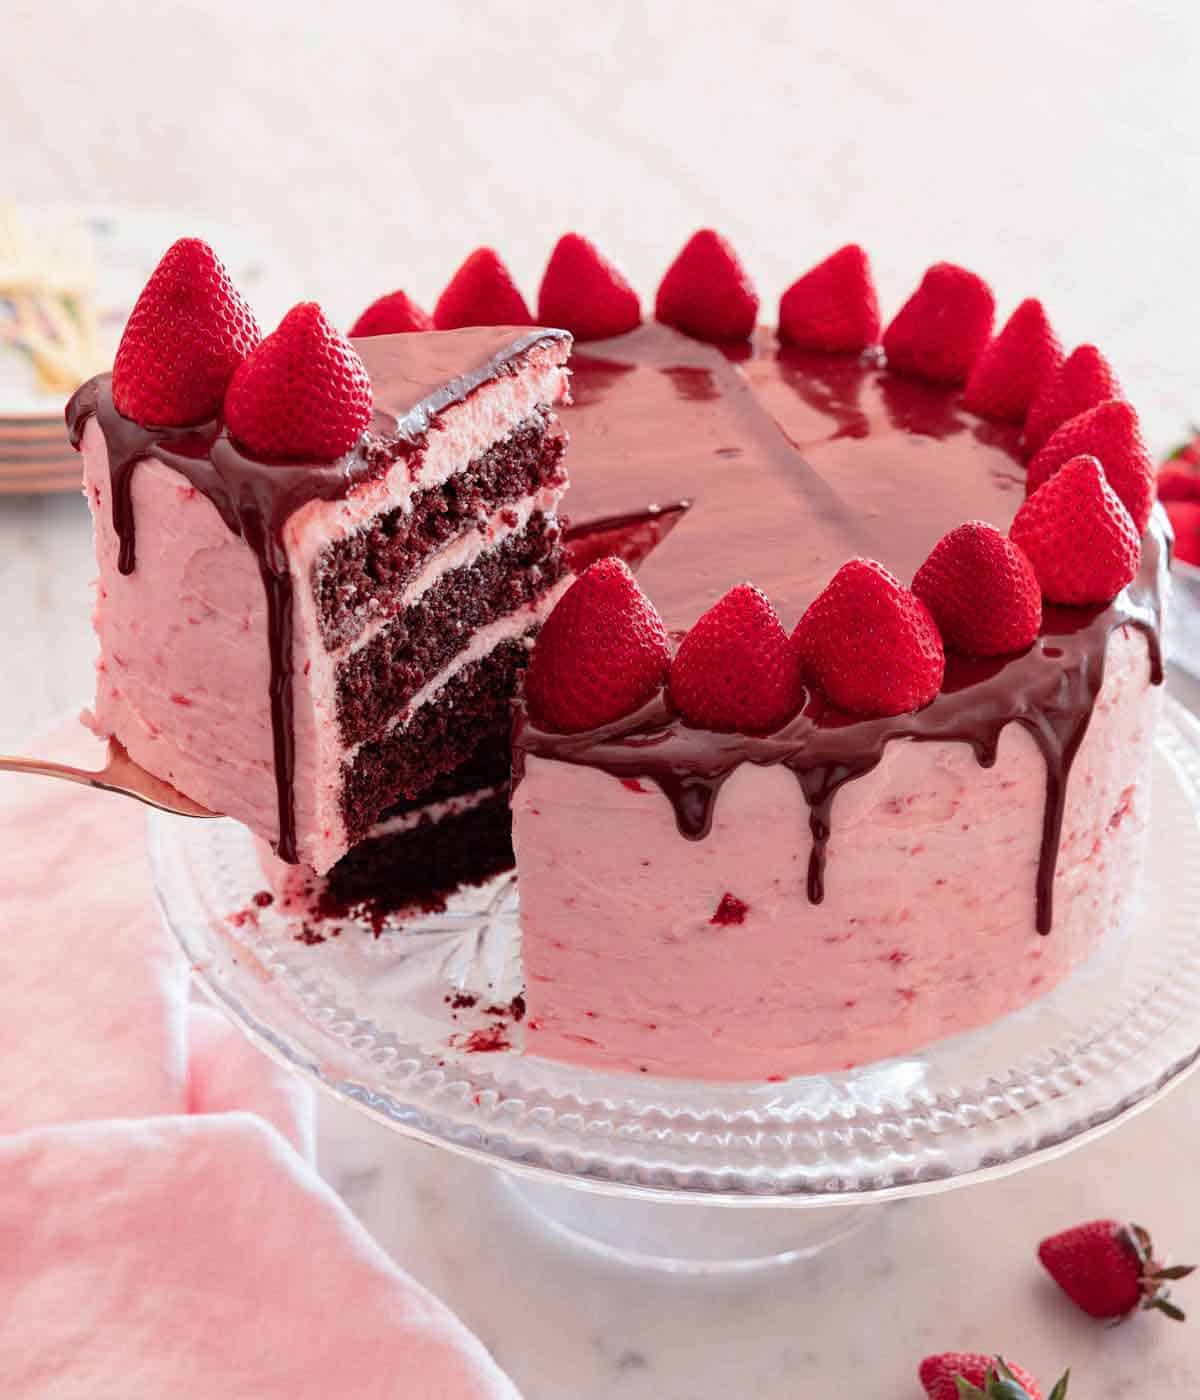 A slice of chocolate strawberry cake lifted from the cake on a clear cake stand.